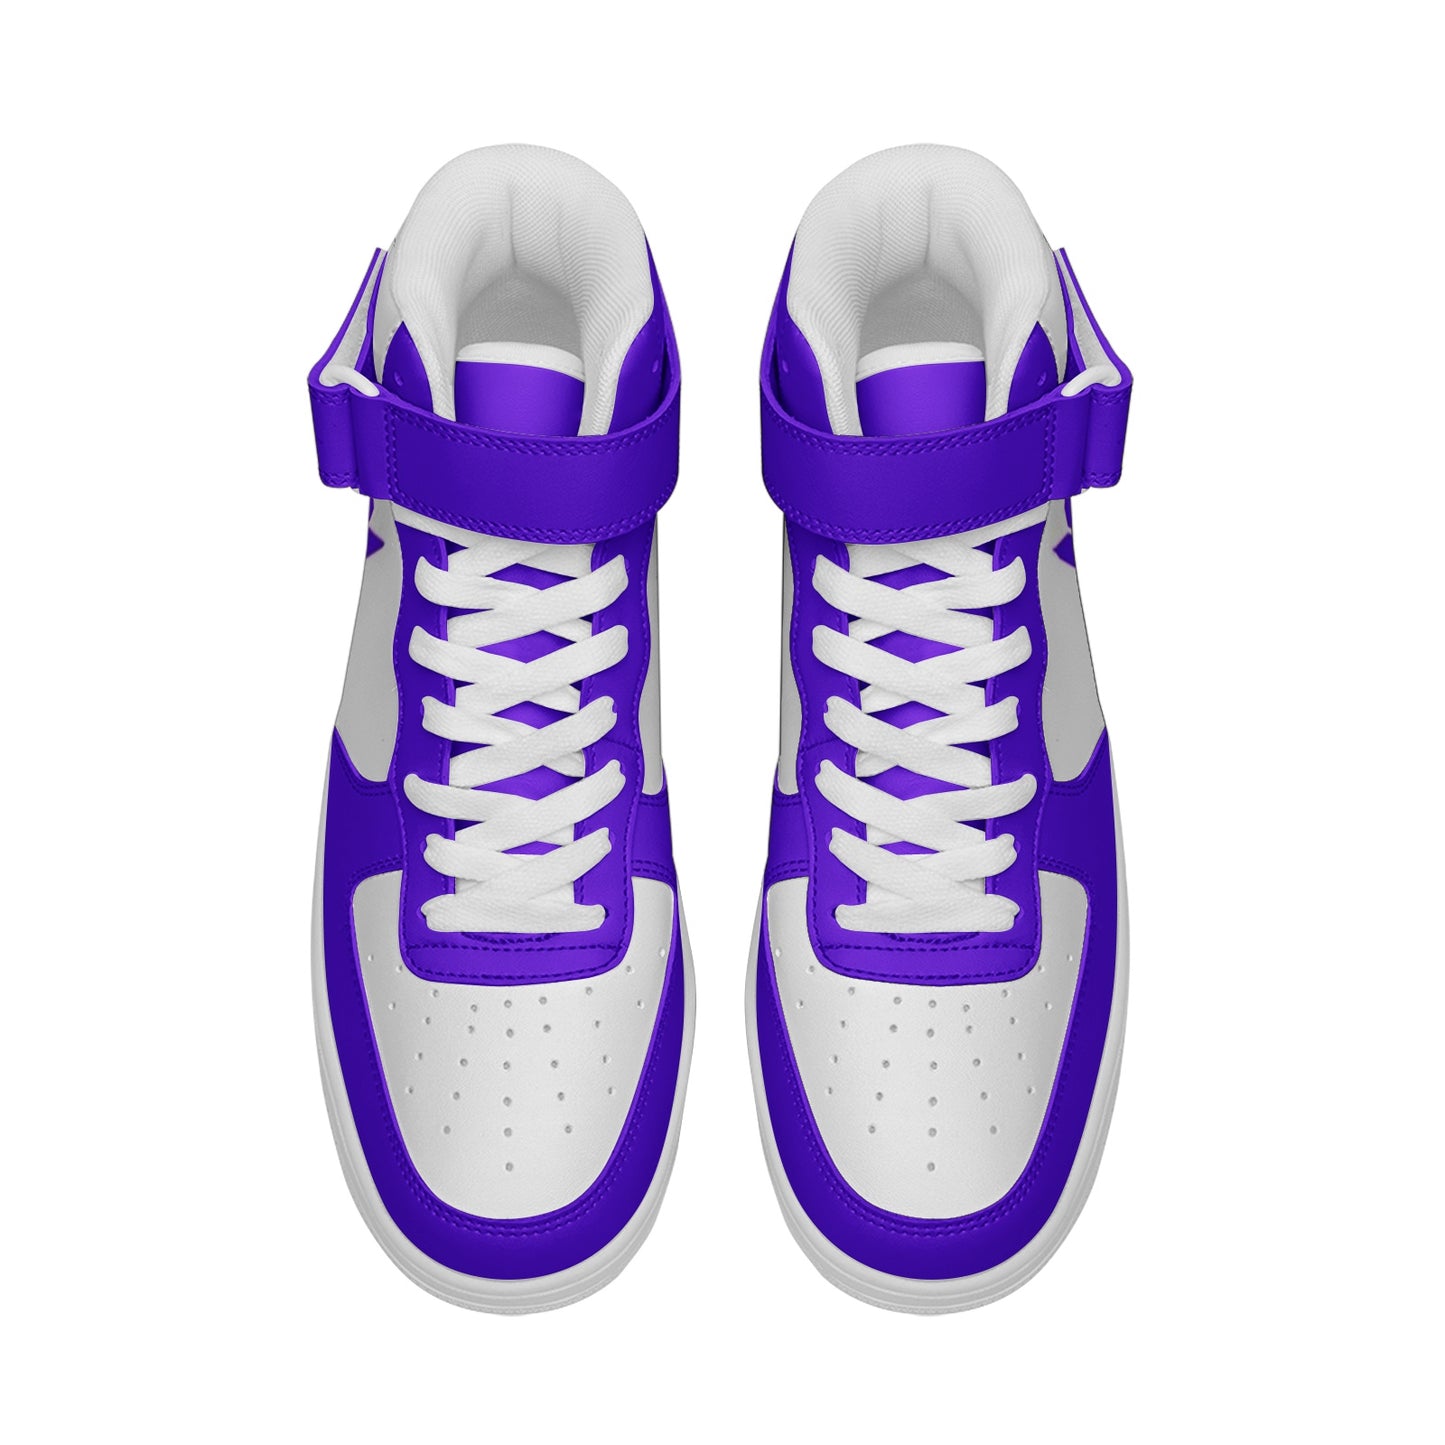 BTS Logo High Top Leather Sneakers - Purple